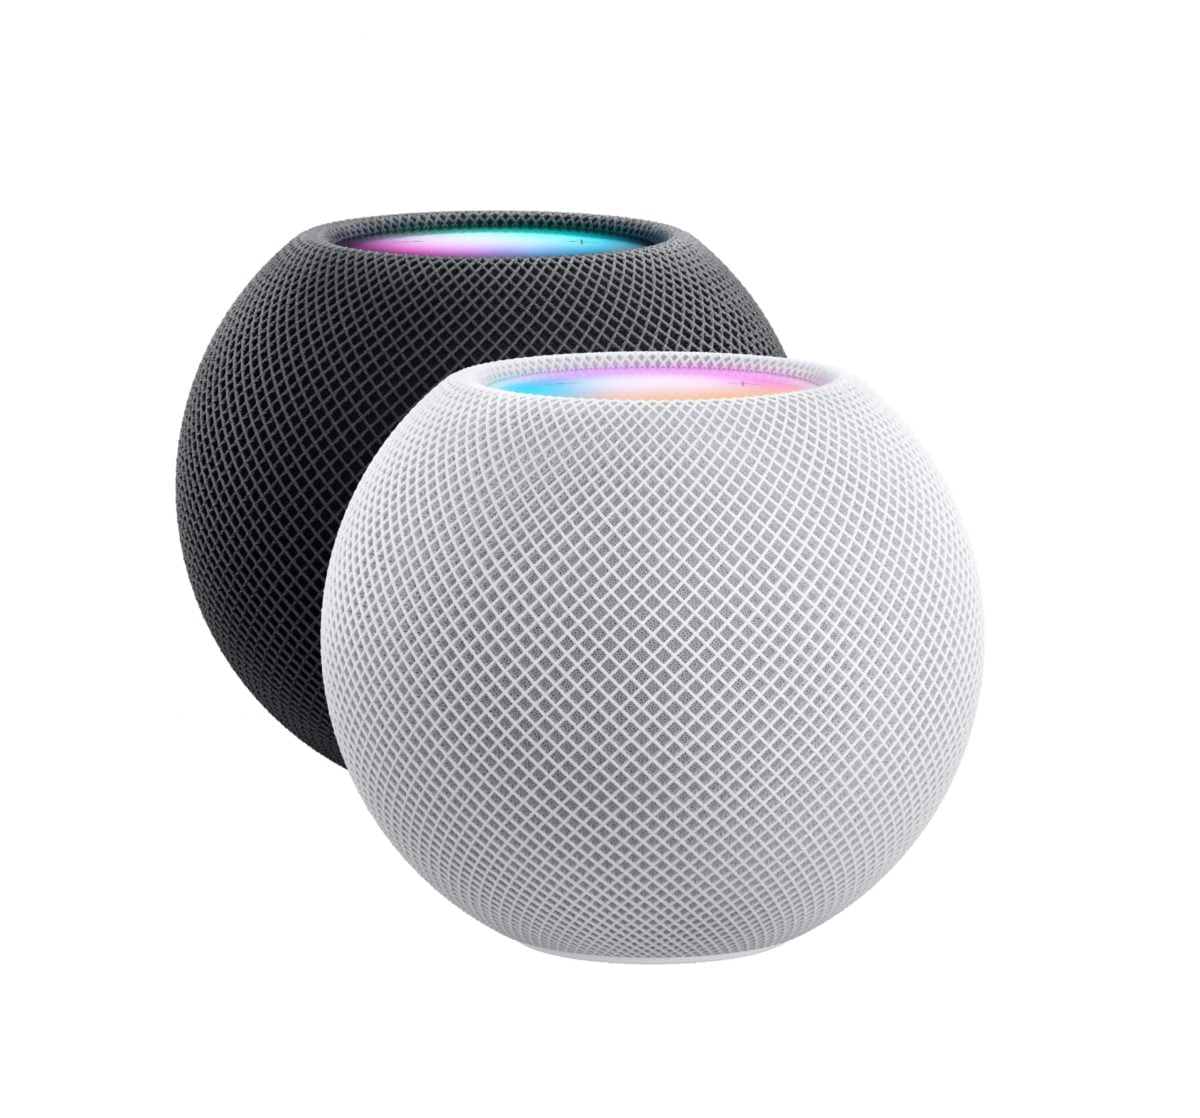 6377590Cv11D Scaled Apple &Lt;H1&Gt;Apple Homepod Mini Space Gray&Lt;/H1&Gt; Jam-Packed With Innovation, Homepod Mini Fills The Entire Room With Rich 360-Degree Audio. Place Multiple Speakers Around The House For A Connected Sound System.² And With Siri, Your Favorite Do-It-All Intelligent Assistant Helps With Everyday Tasks And Controls Your Smart Home Privately And Securely. &Lt;H2&Gt;Features:&Lt;/H2&Gt; - Fills The Entire Room With Rich 360-Degree Audio - Siri Is Your Do-It-All Intelligent Assistant, Helping With Everyday Tasks - Easily Control Your Smart Home - Designed To Keep Your Data Private And Secure - Place Multiple Homepod Mini Speakers Around The House For A Connected Sound System² - Intercom Messages To Every Room³ - Pair Two Homepod Mini Speakers Together For Immersive Stereo Sound - Voice Recognition Gives Each Family Member A Personalized Experience⁴ - Seamlessly Hand-Off Audio By Bringing Your Iphone Close To Homepod Setup Requires Wi-Fi And Iphone, Ipad, Or Ipod Touch With The Latest Software. &Lt;Pre&Gt;Apple Warranty&Lt;/Pre&Gt; Homepod Mini Apple Homepod Mini Space Gray